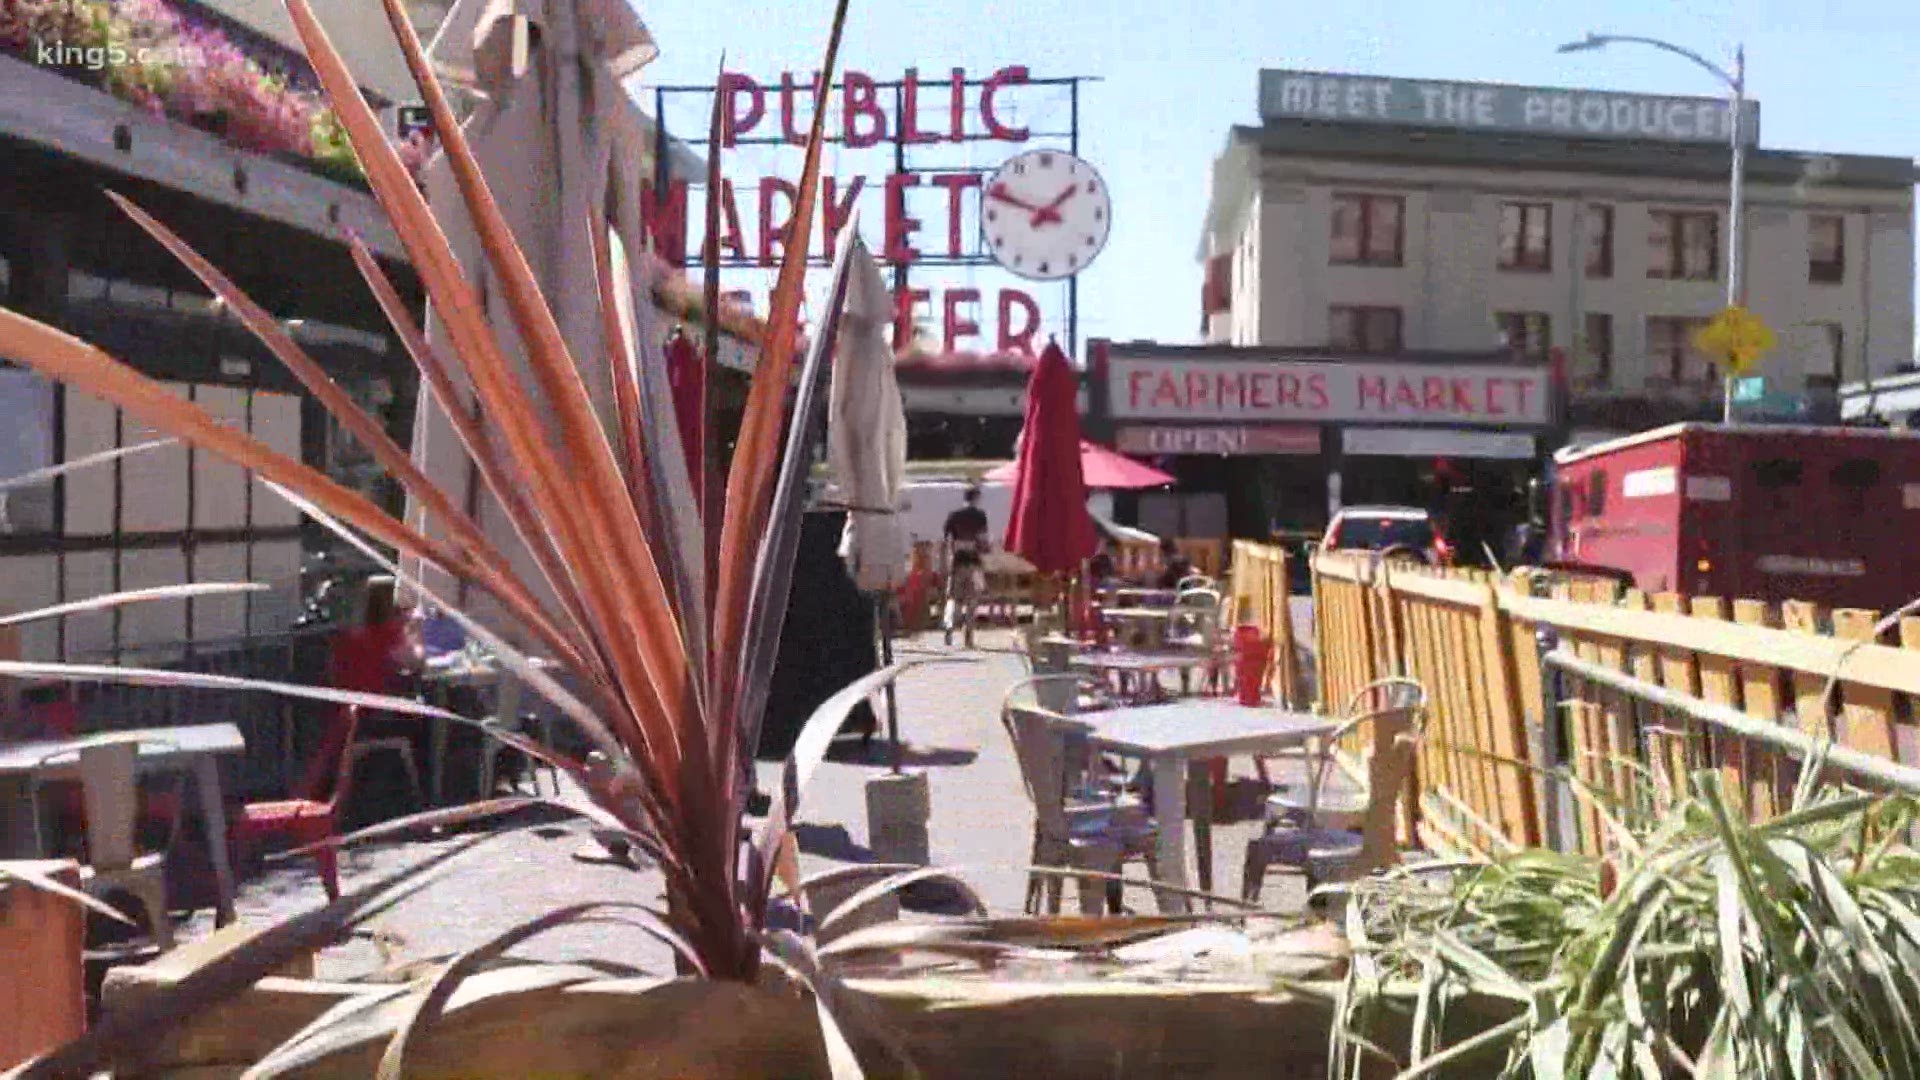 The historic market has put dining tables on its streets and outdoor spaces, so customers can once again dine in at the market despite the ongoing pandemic.